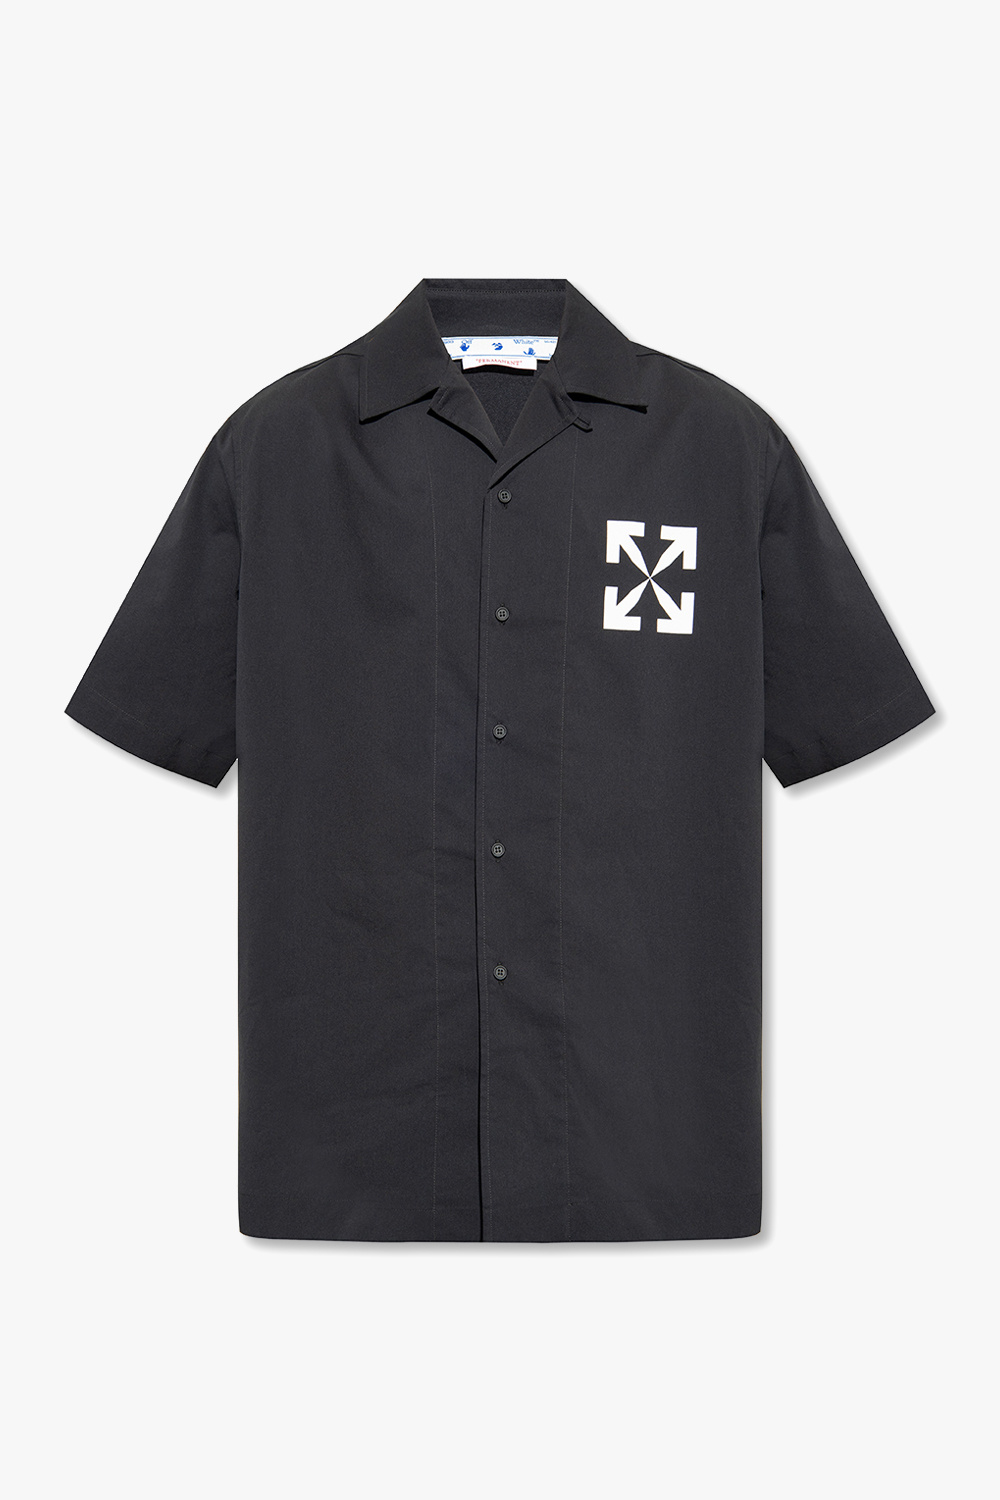 Off-White Shirt with short sleeves